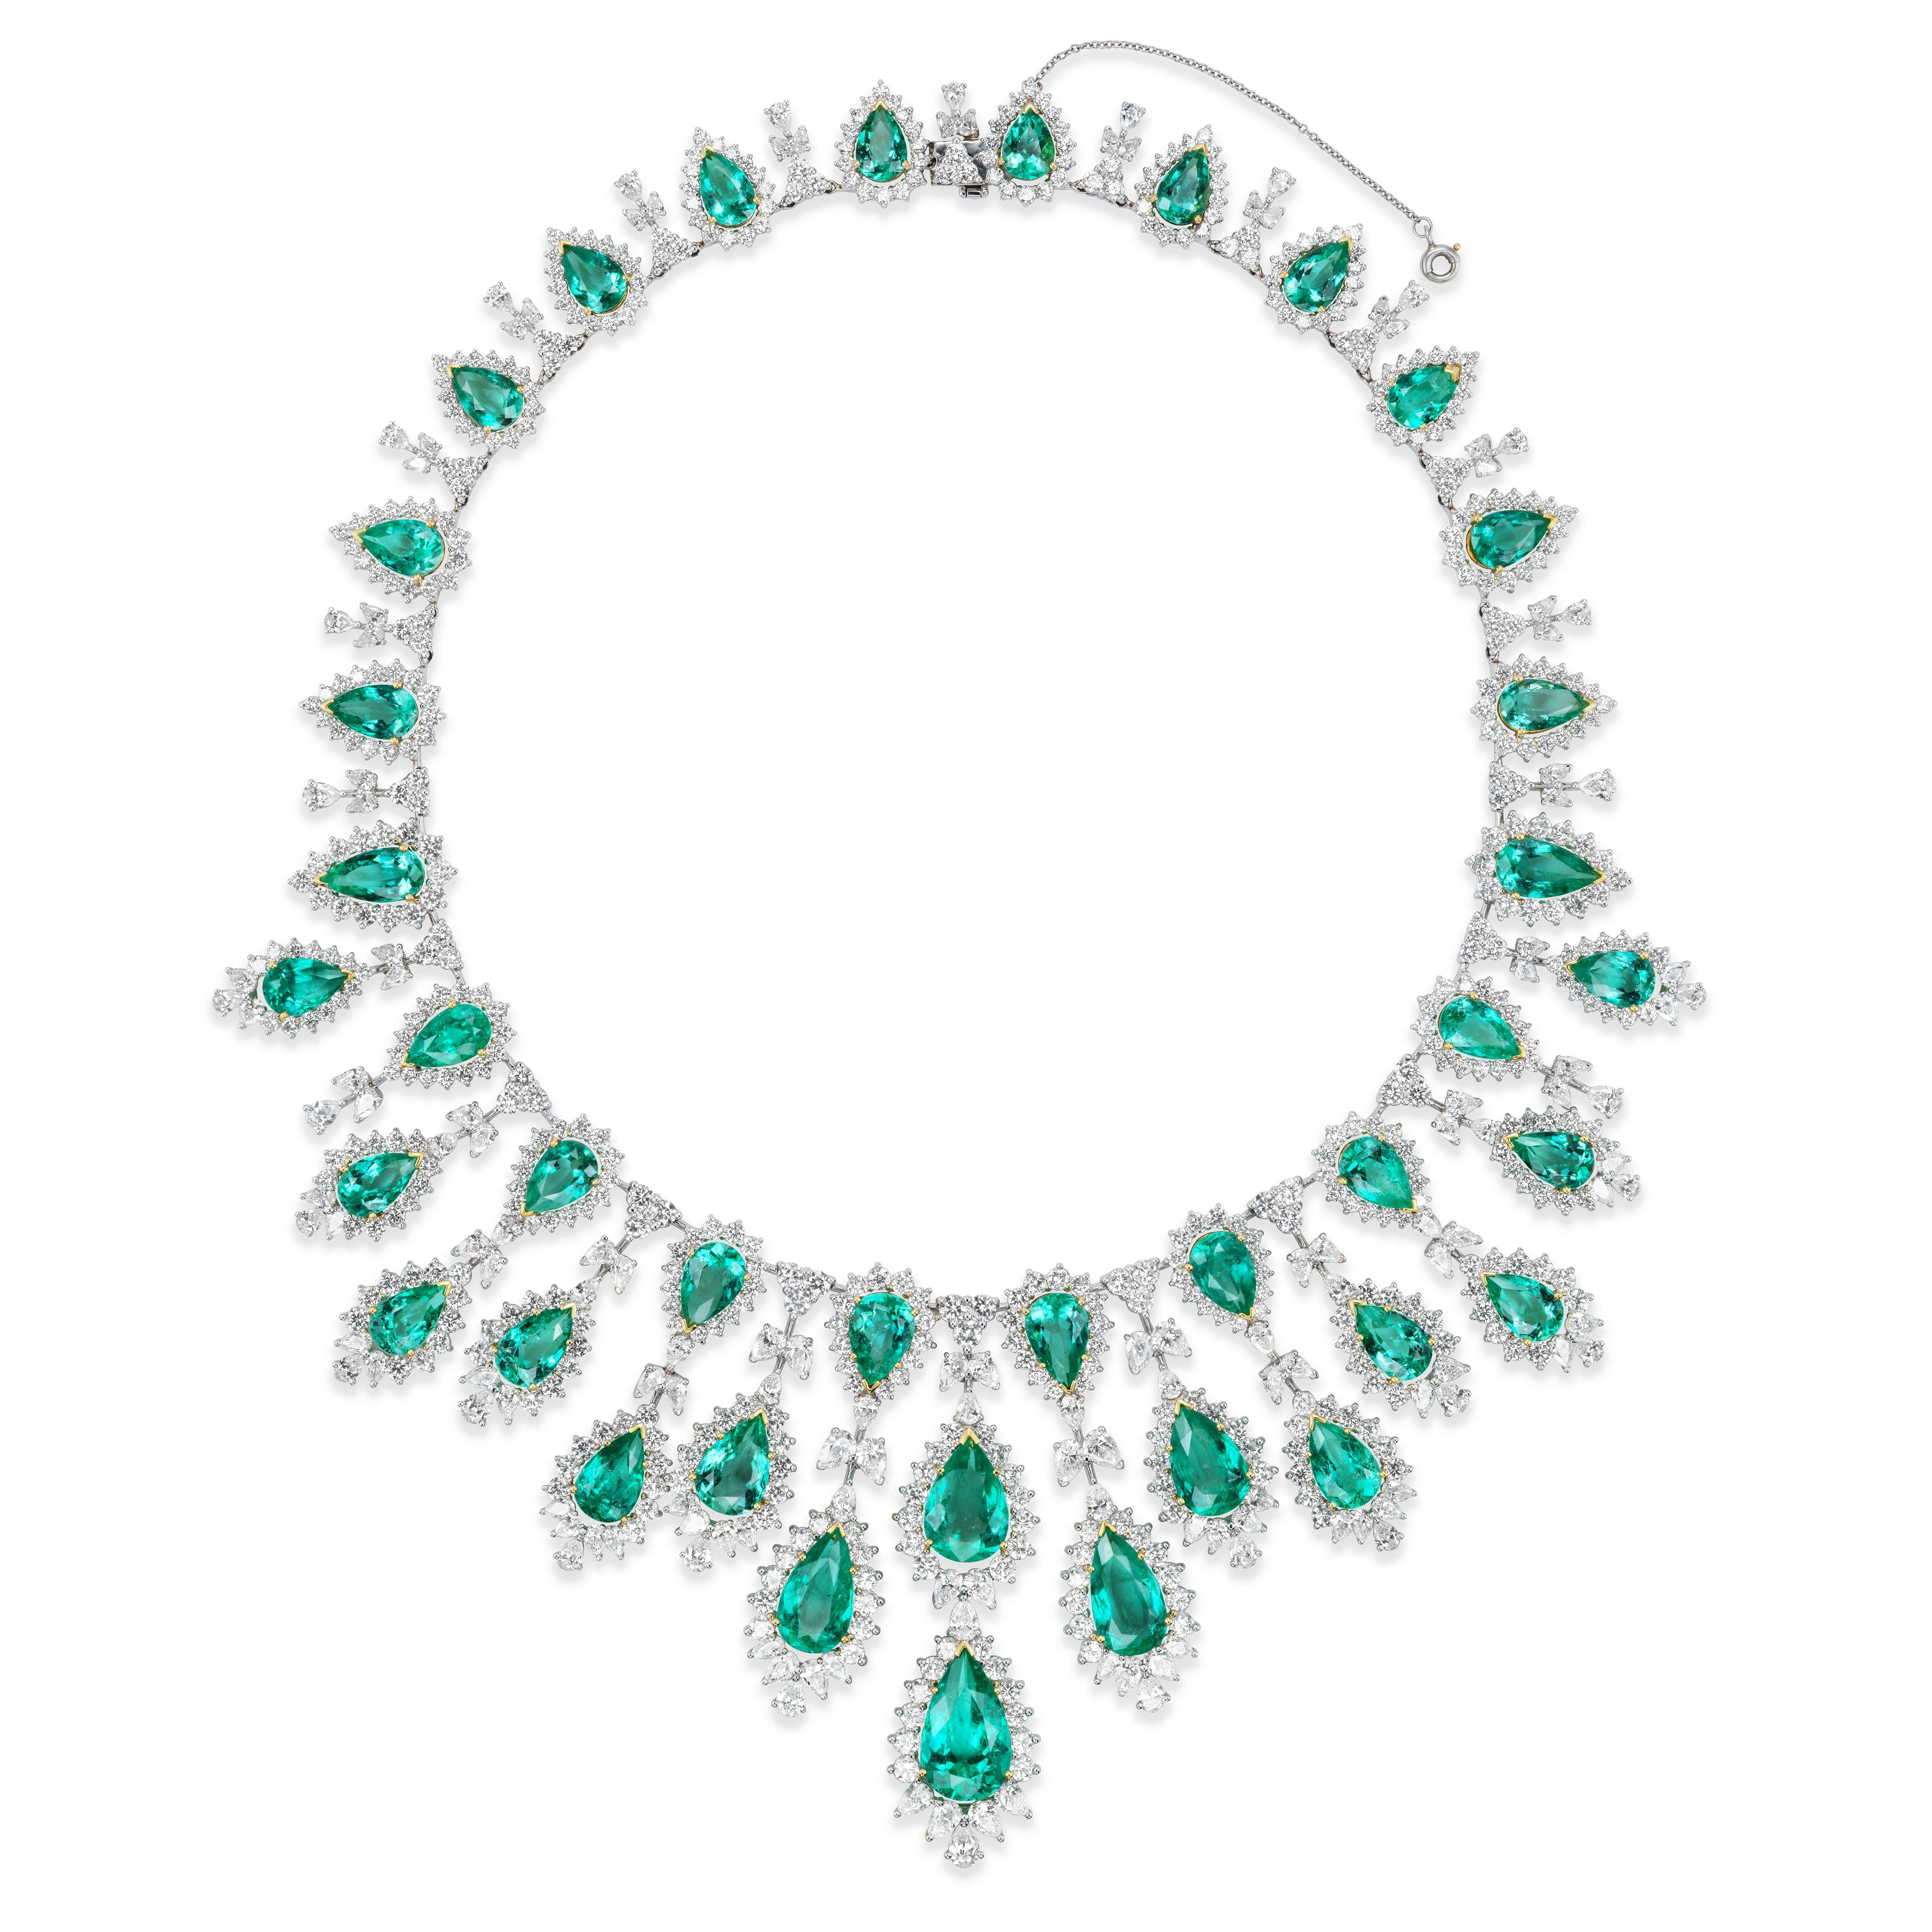 The Van Necklace & Earrings Suite is a ethereal depiction of nature. It is named after the Sanskrit word for forest - Van (pronounced akin to 'one'). The fine Colombian Emeralds juxtaposed with scintillating diamonds come together to create a suite